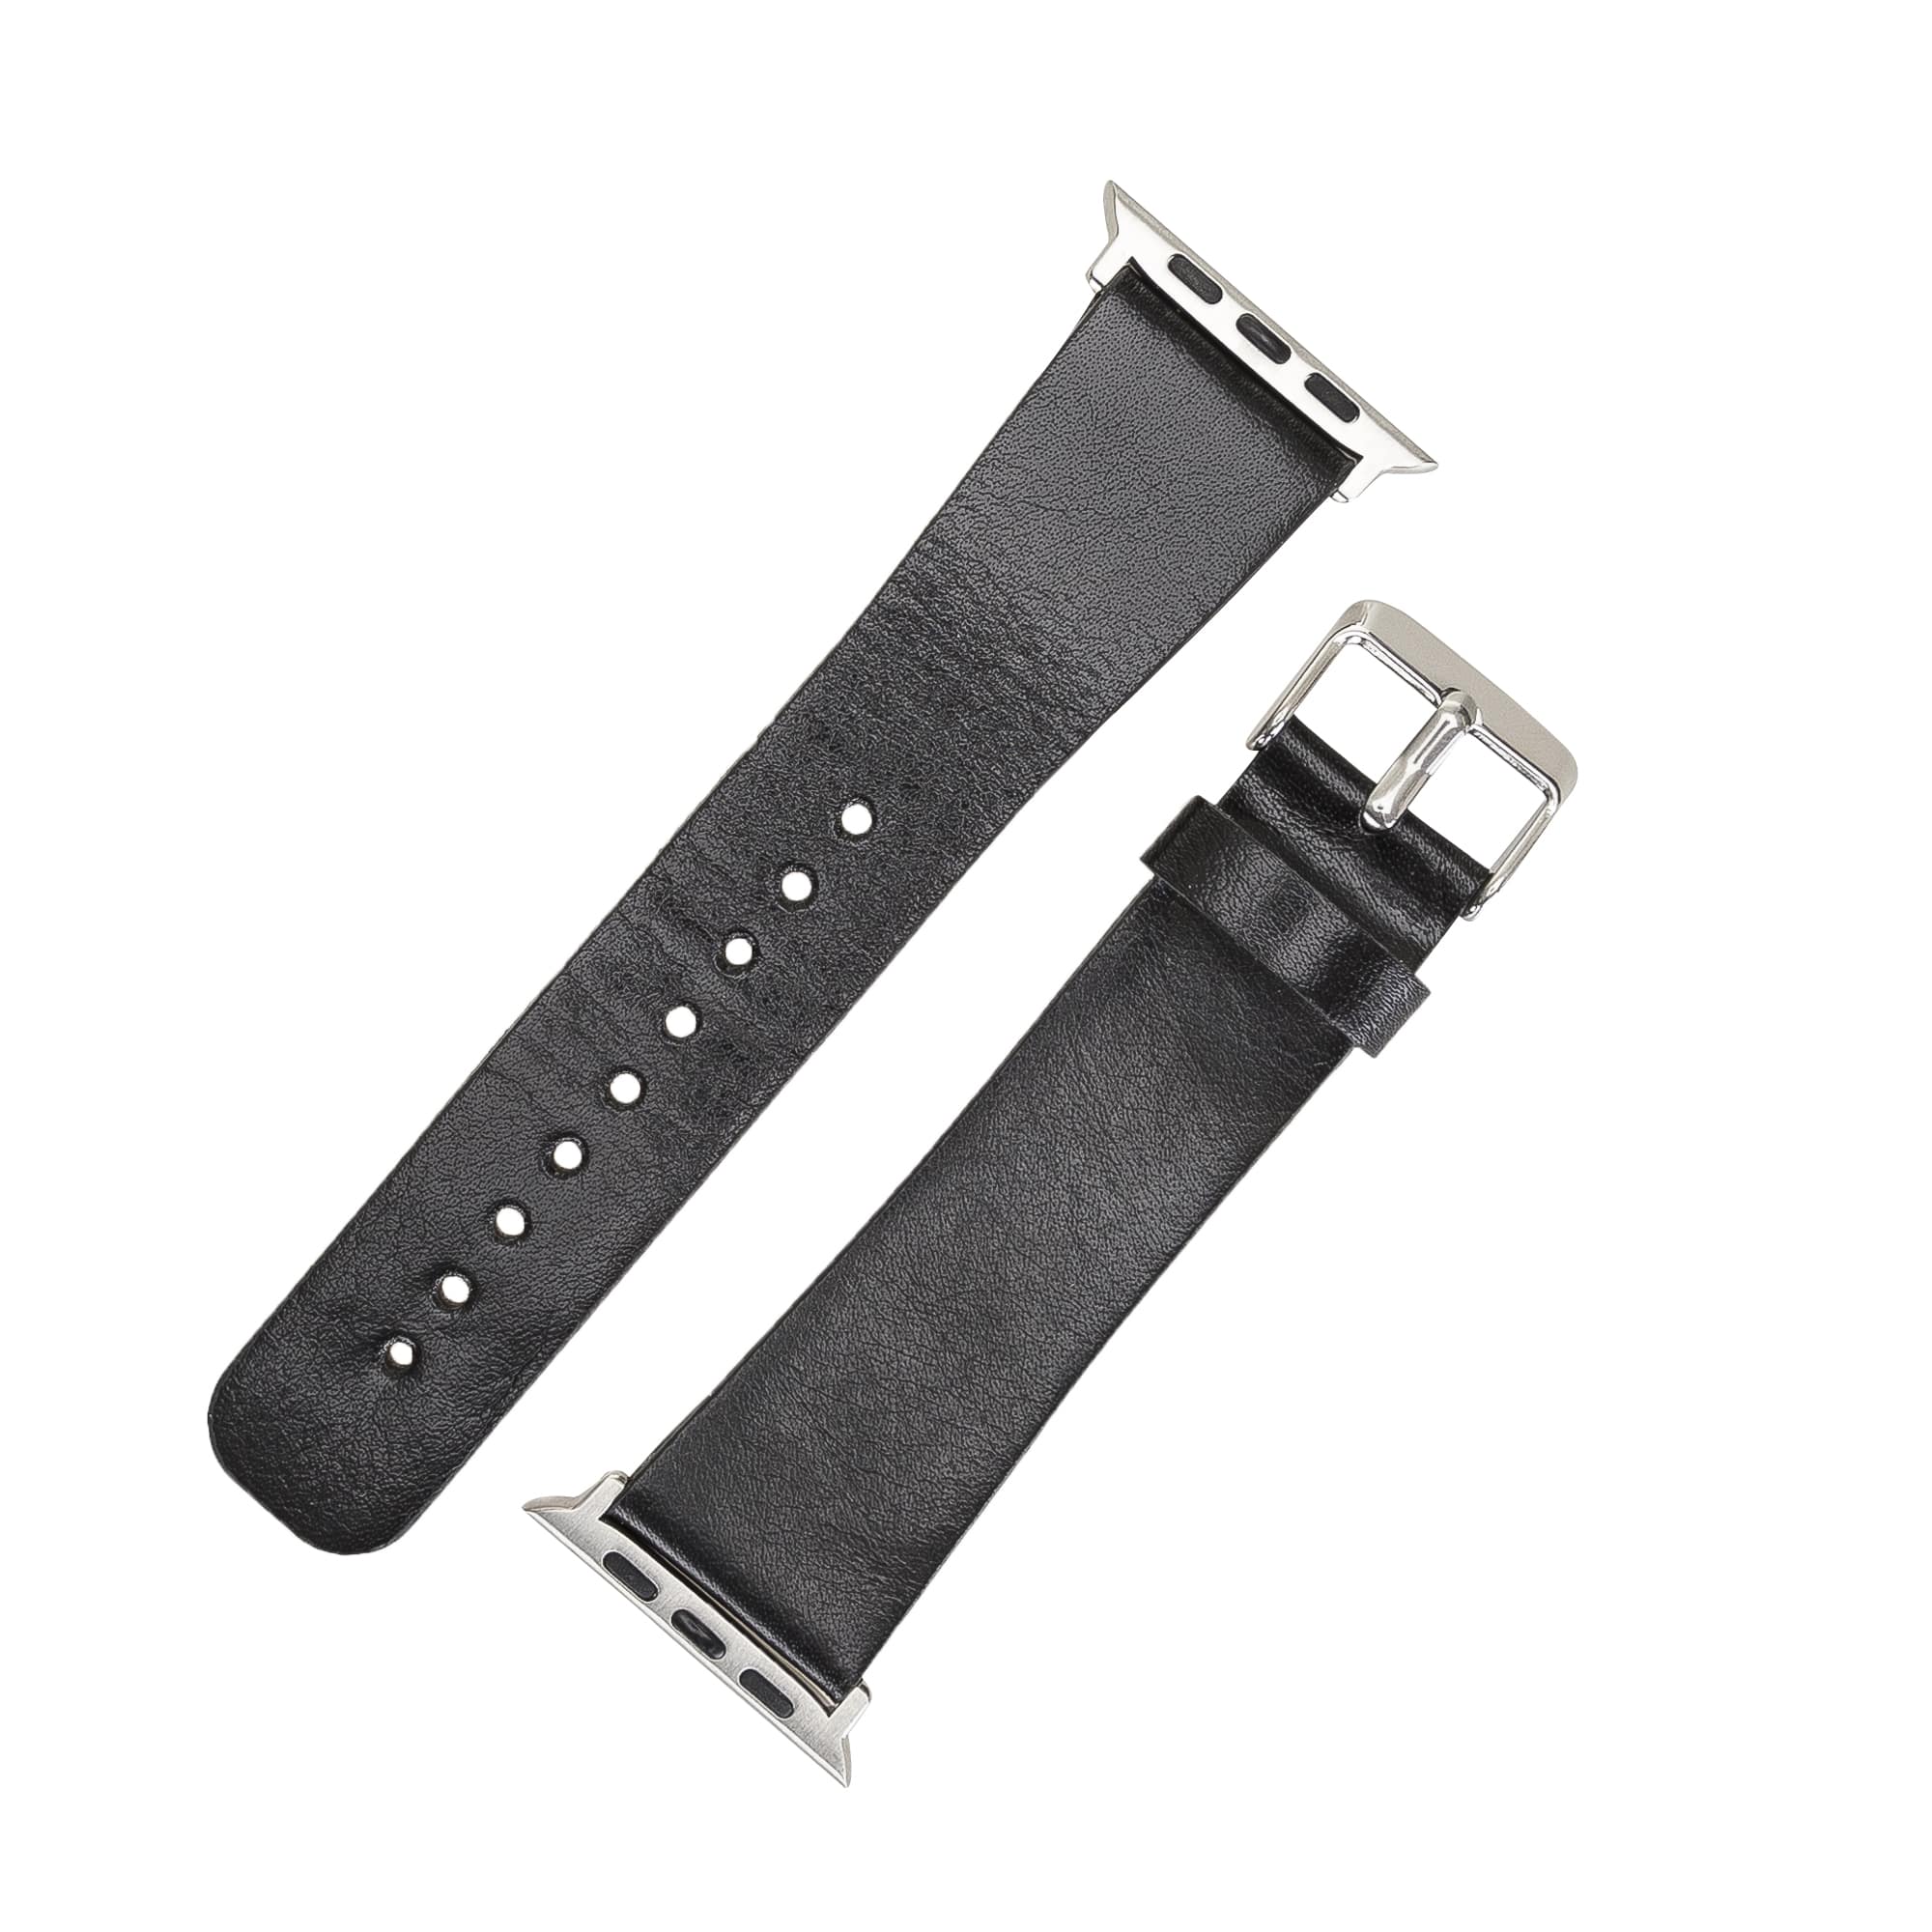 Cambridge Black Genuine Leather Apple Watch Band Strap 38mm 40mm 42mm 44mm 45mm for All Series - Bomonti - 4